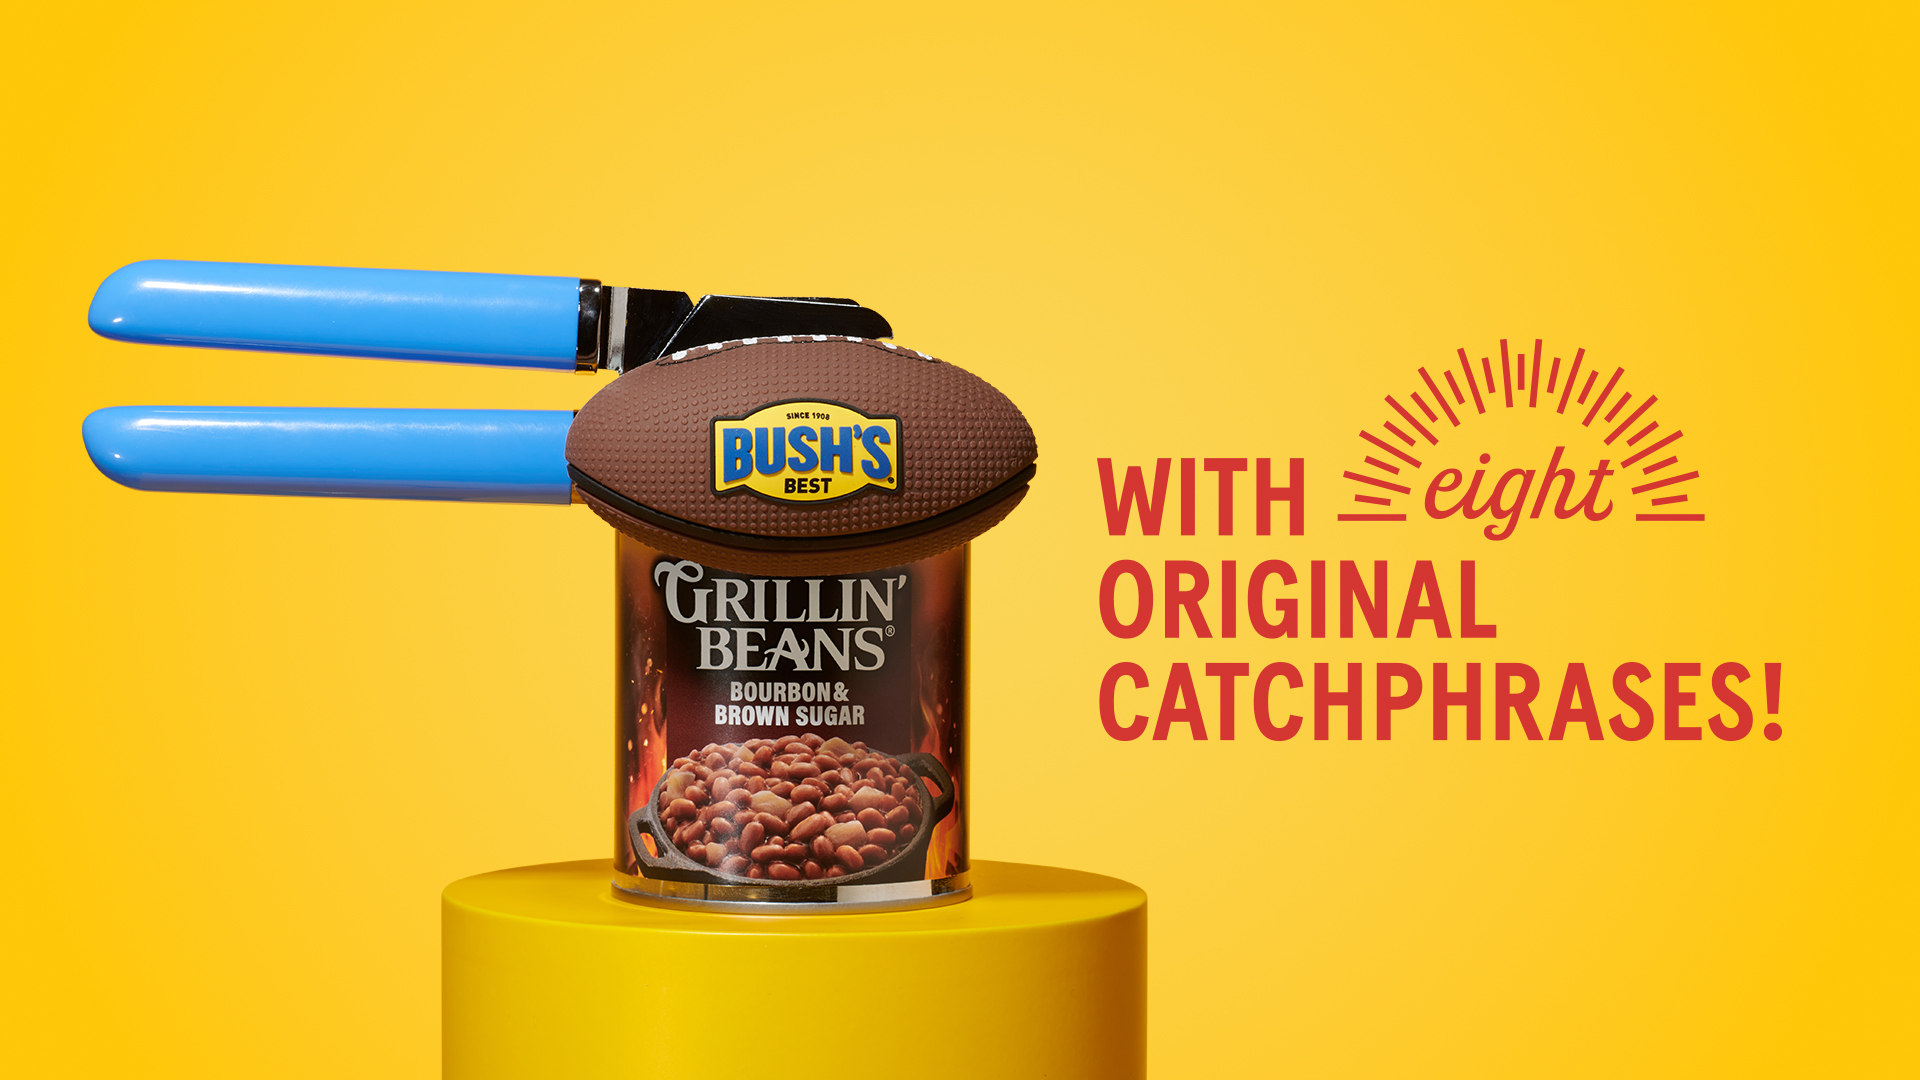 Bush's Baked Beans Gives Dads a Rare Opportunity to Tailgate with Peyton  Manning in 'Manning the Grill' Contest